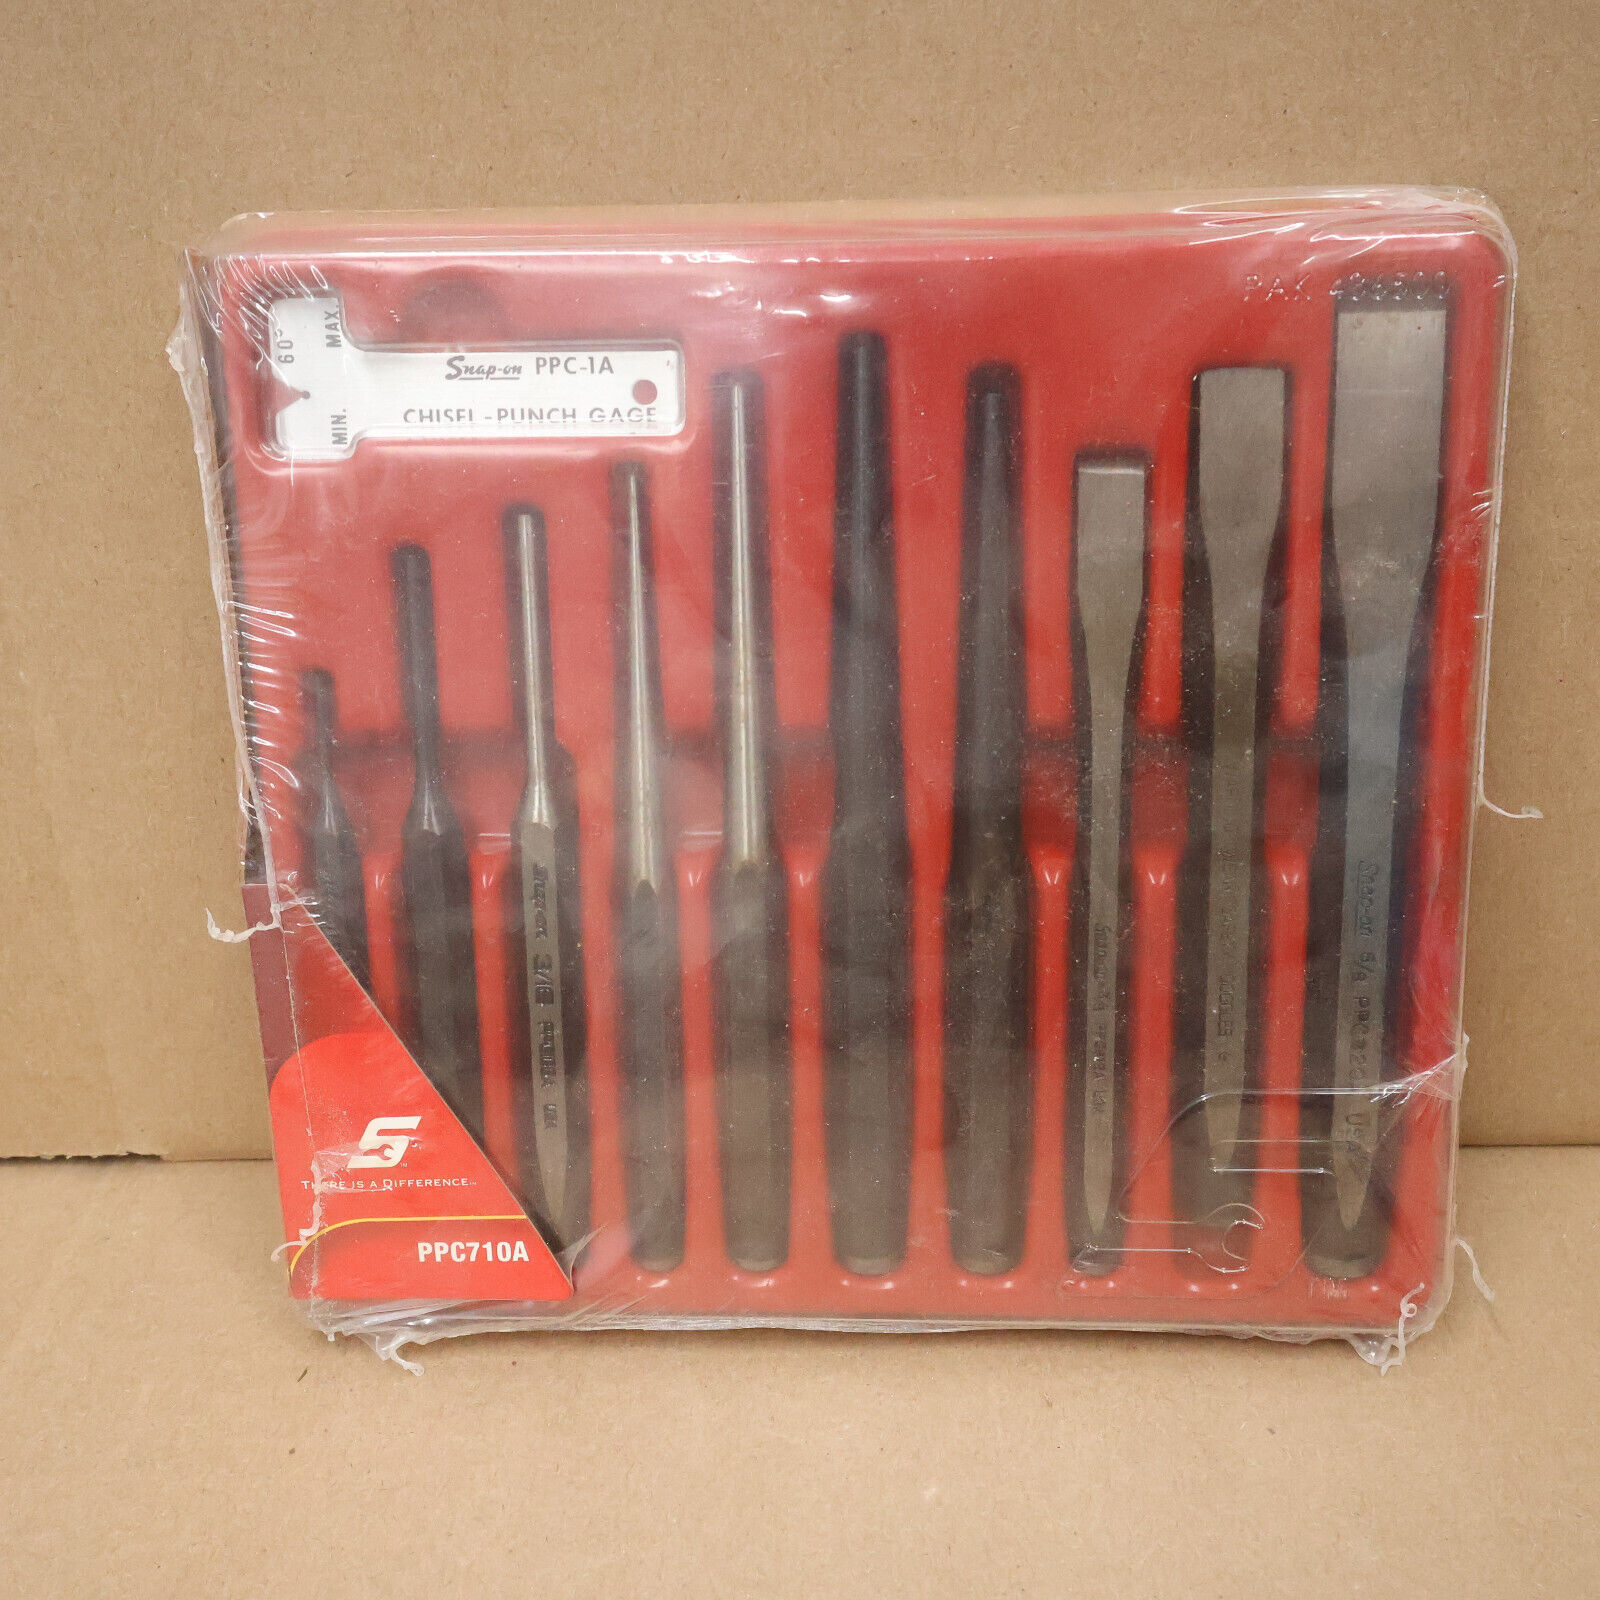 NOS Sealed Snap On PPC710A Chisel and Punch Set Mechanics Tool Set